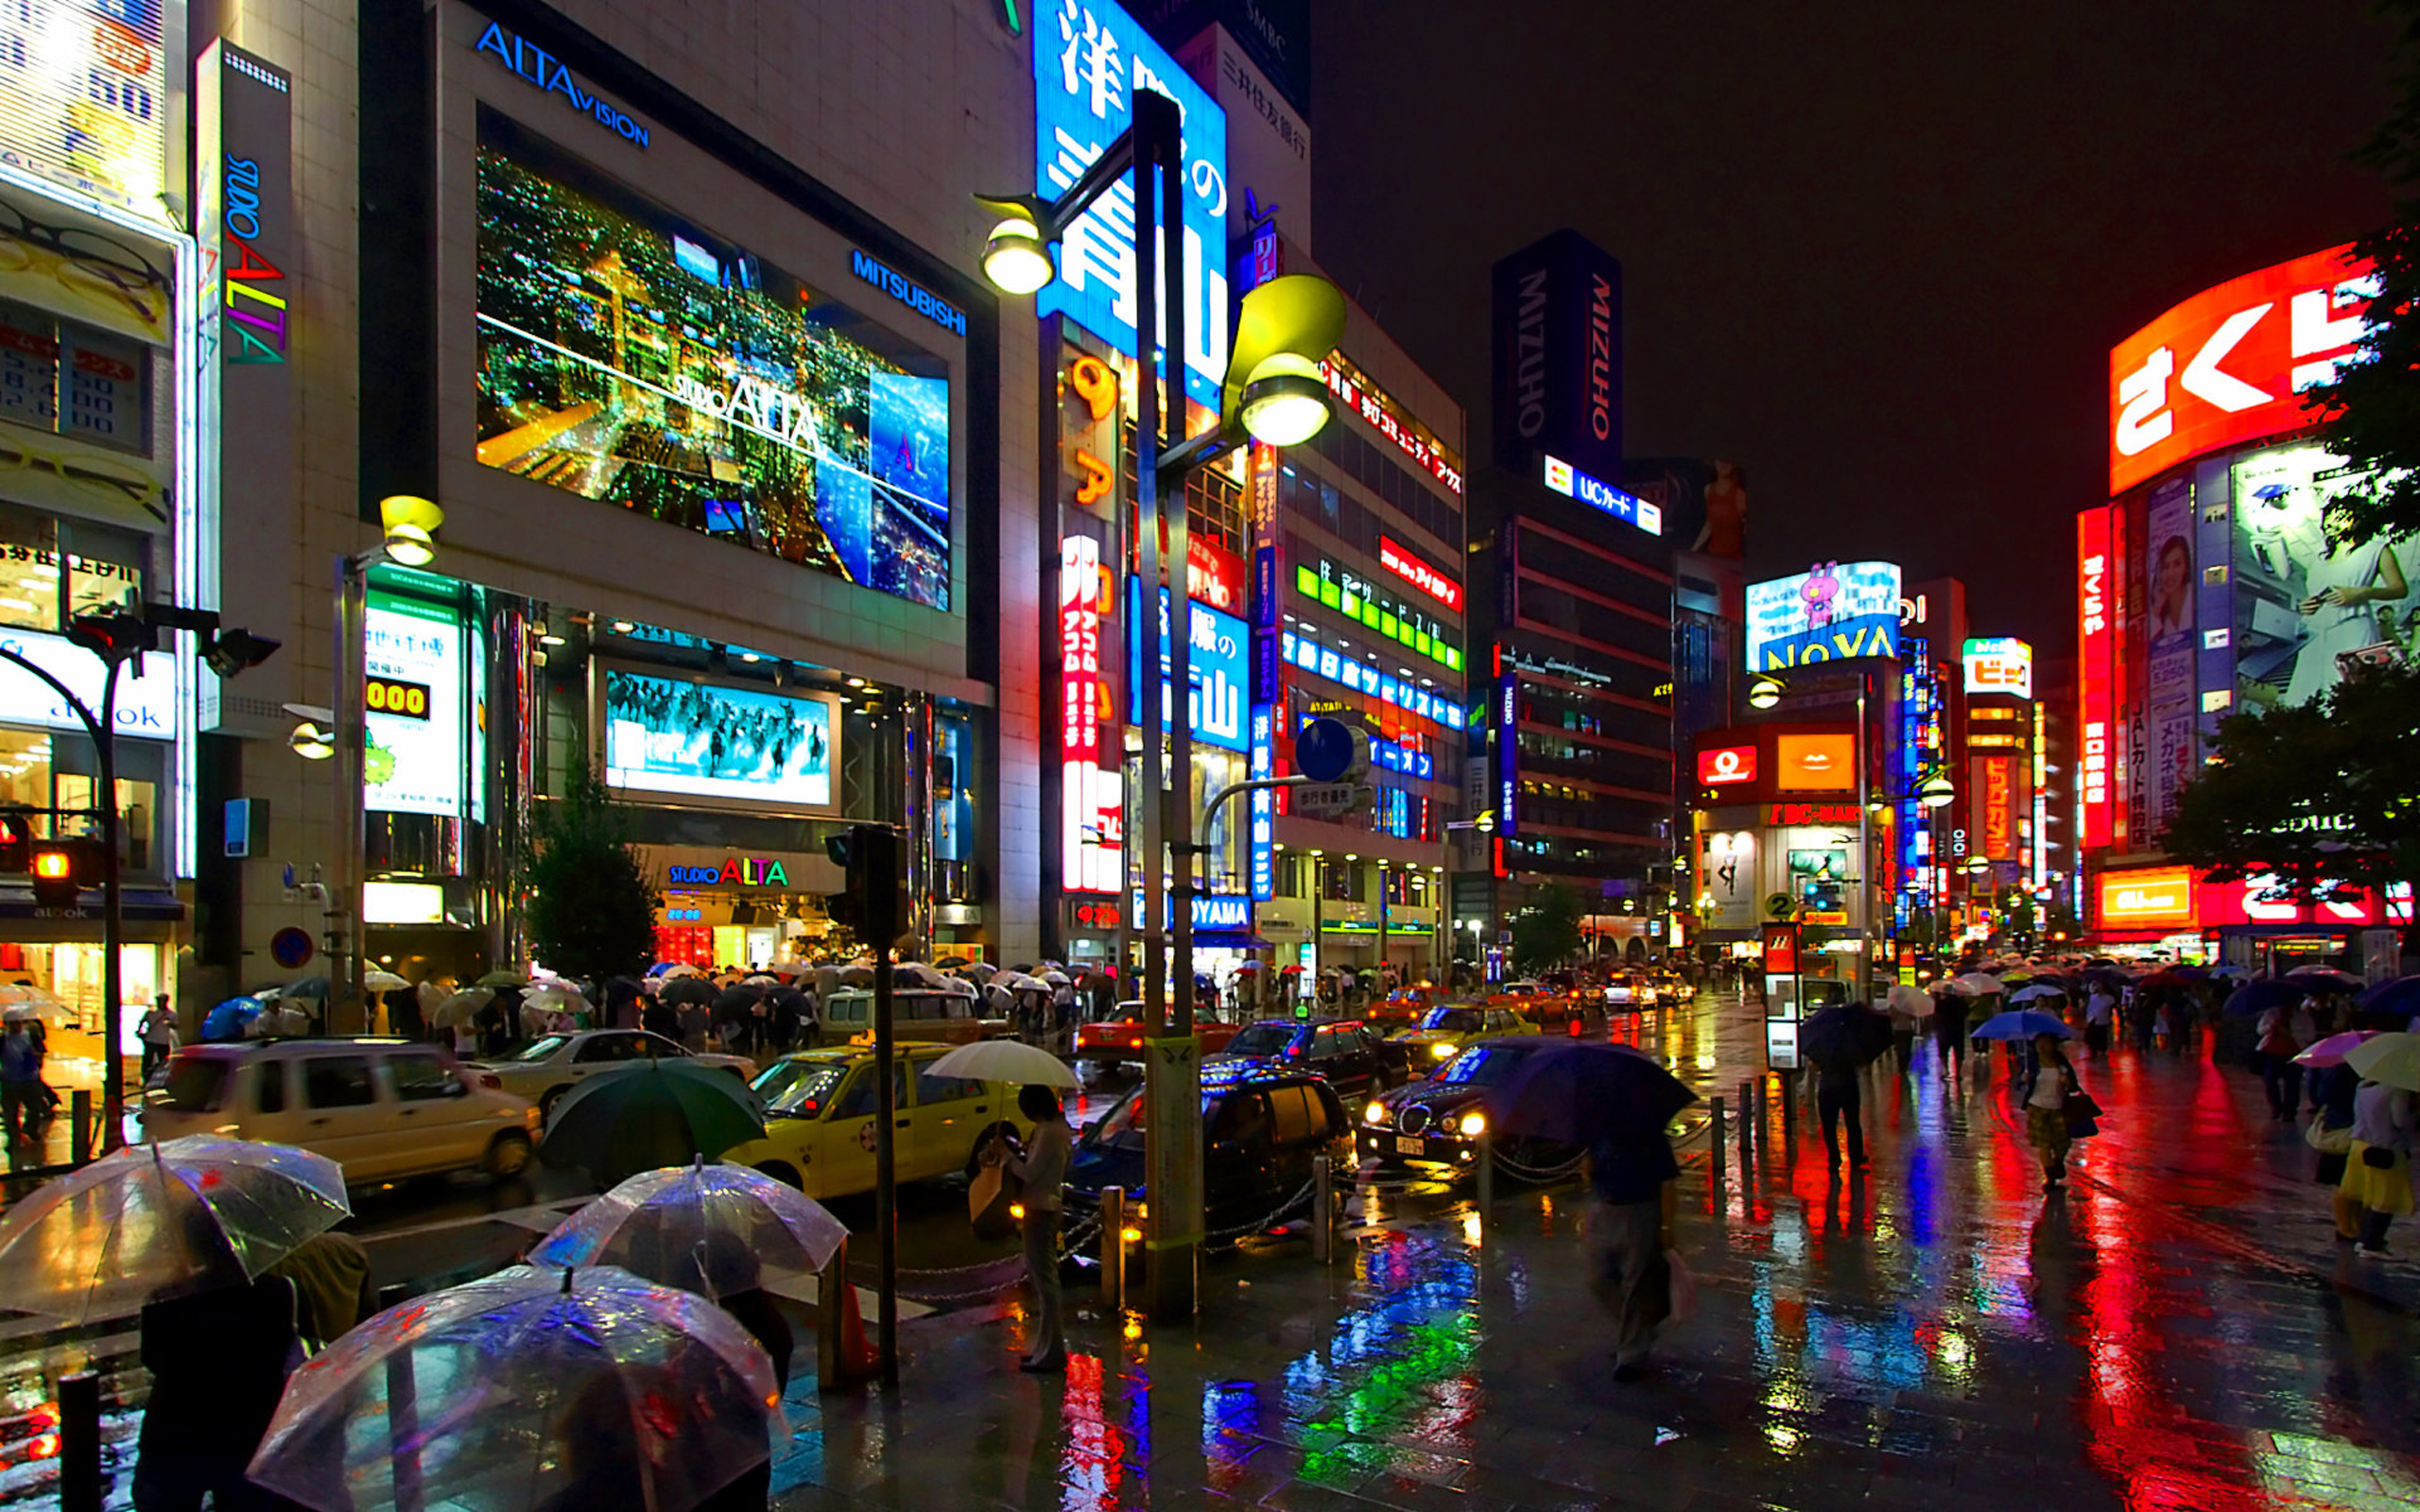 Rain In Japan City | Free Desktop Wallpapers for Widescreen, HD and ...